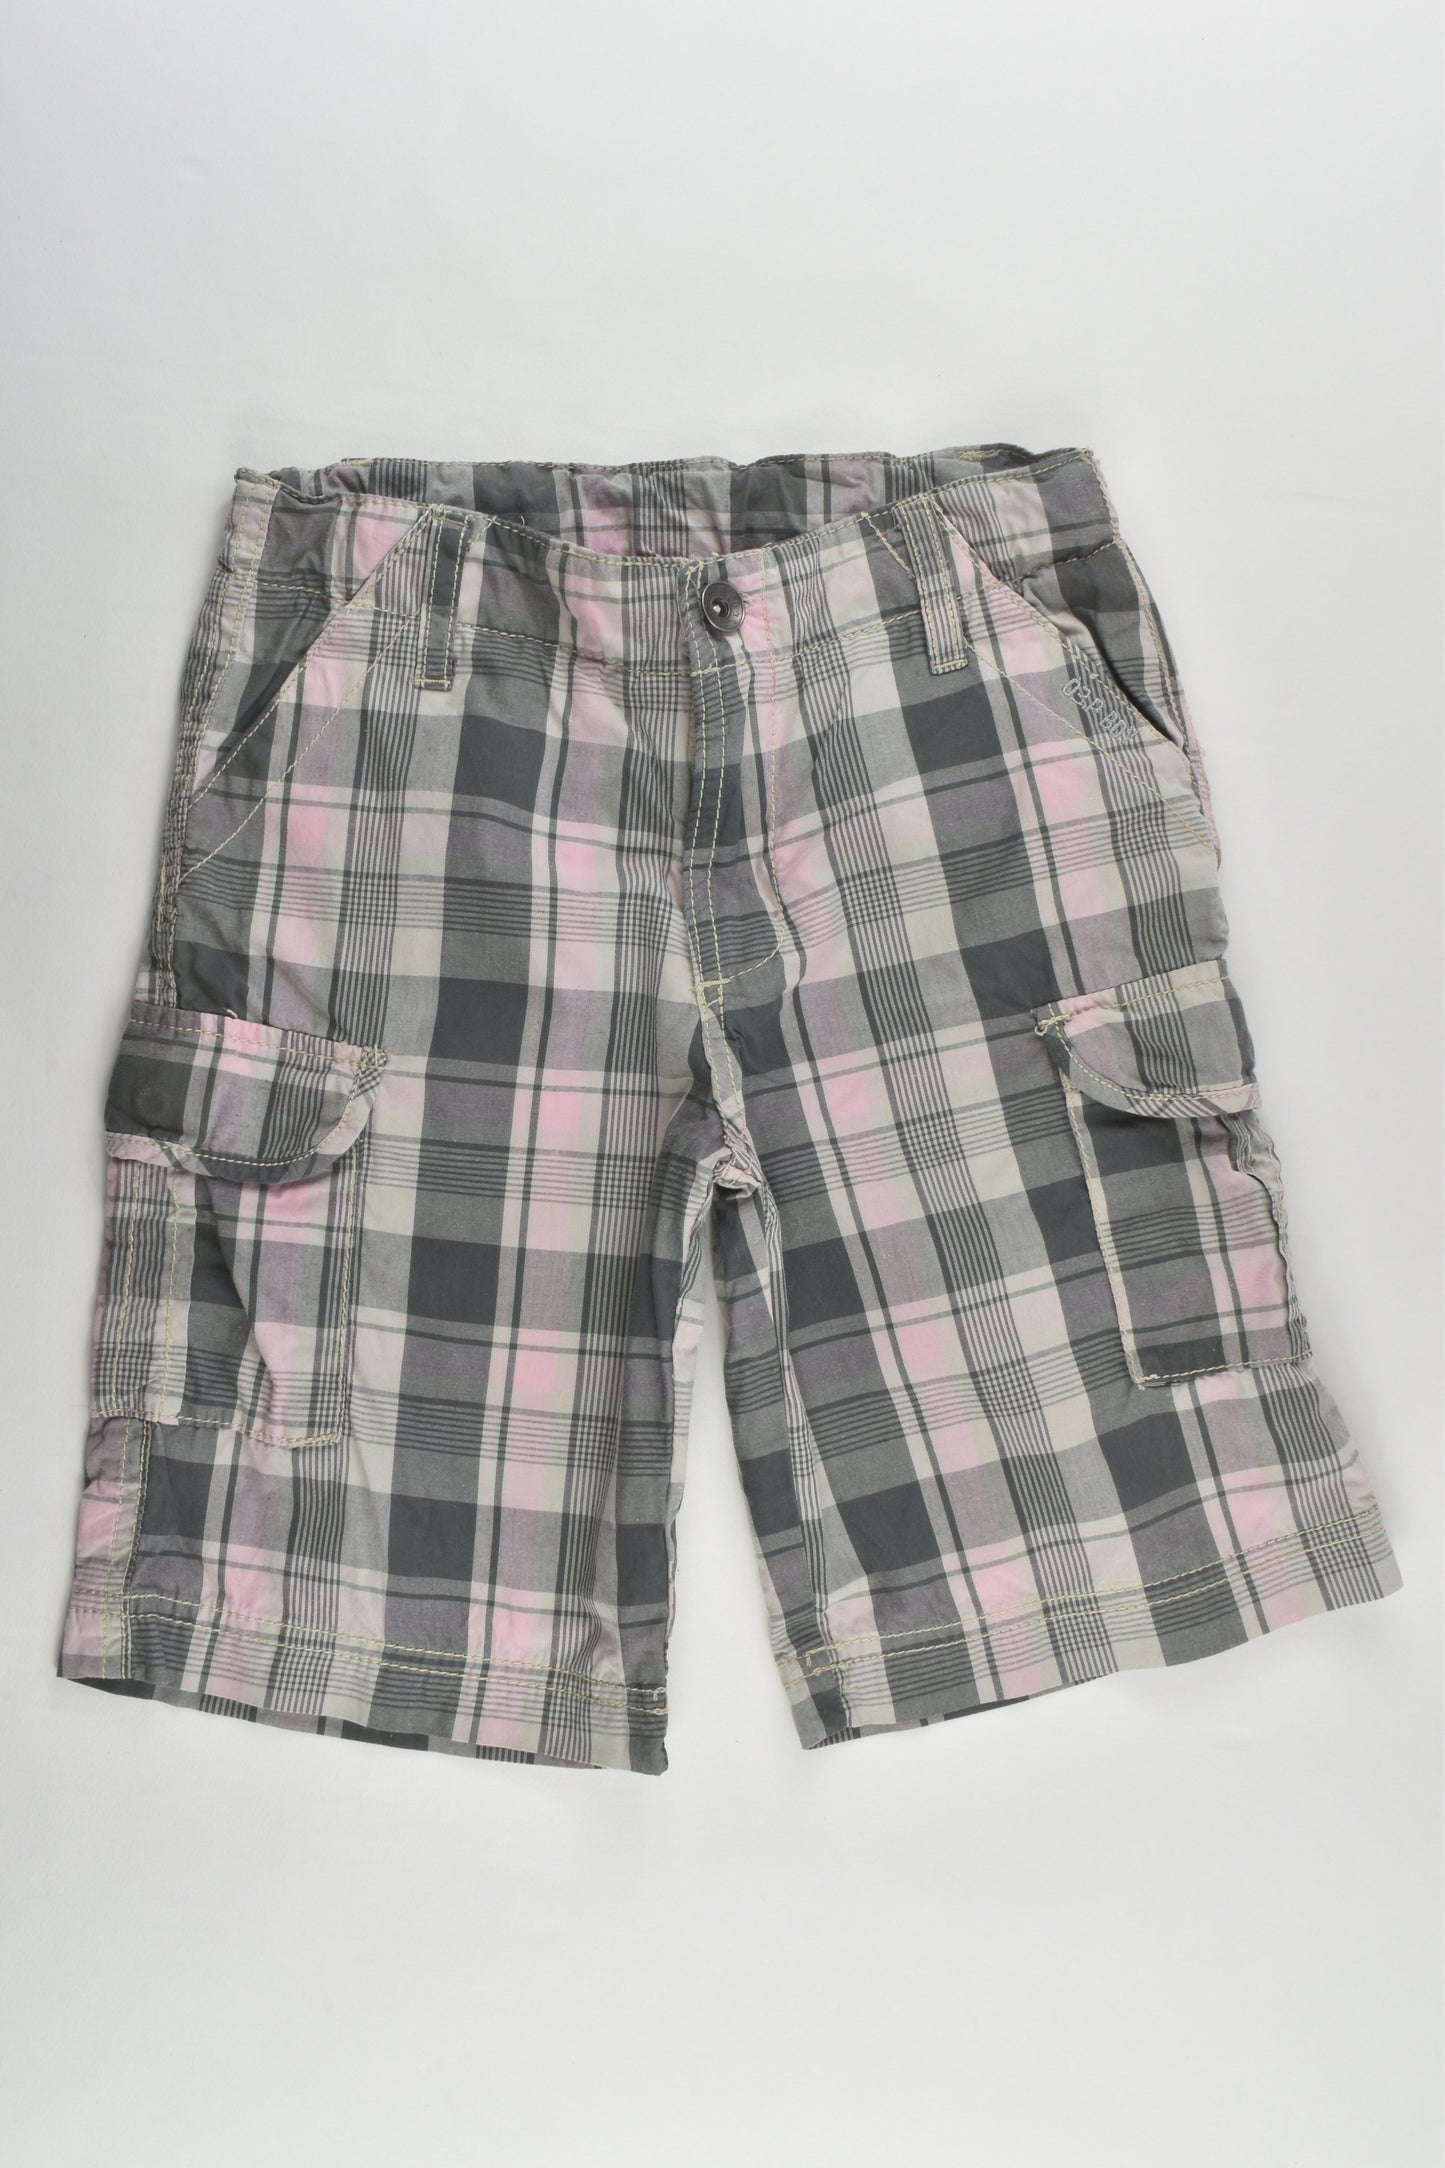 3 Pommes Size 6-7 Lightweight Checked Shorts